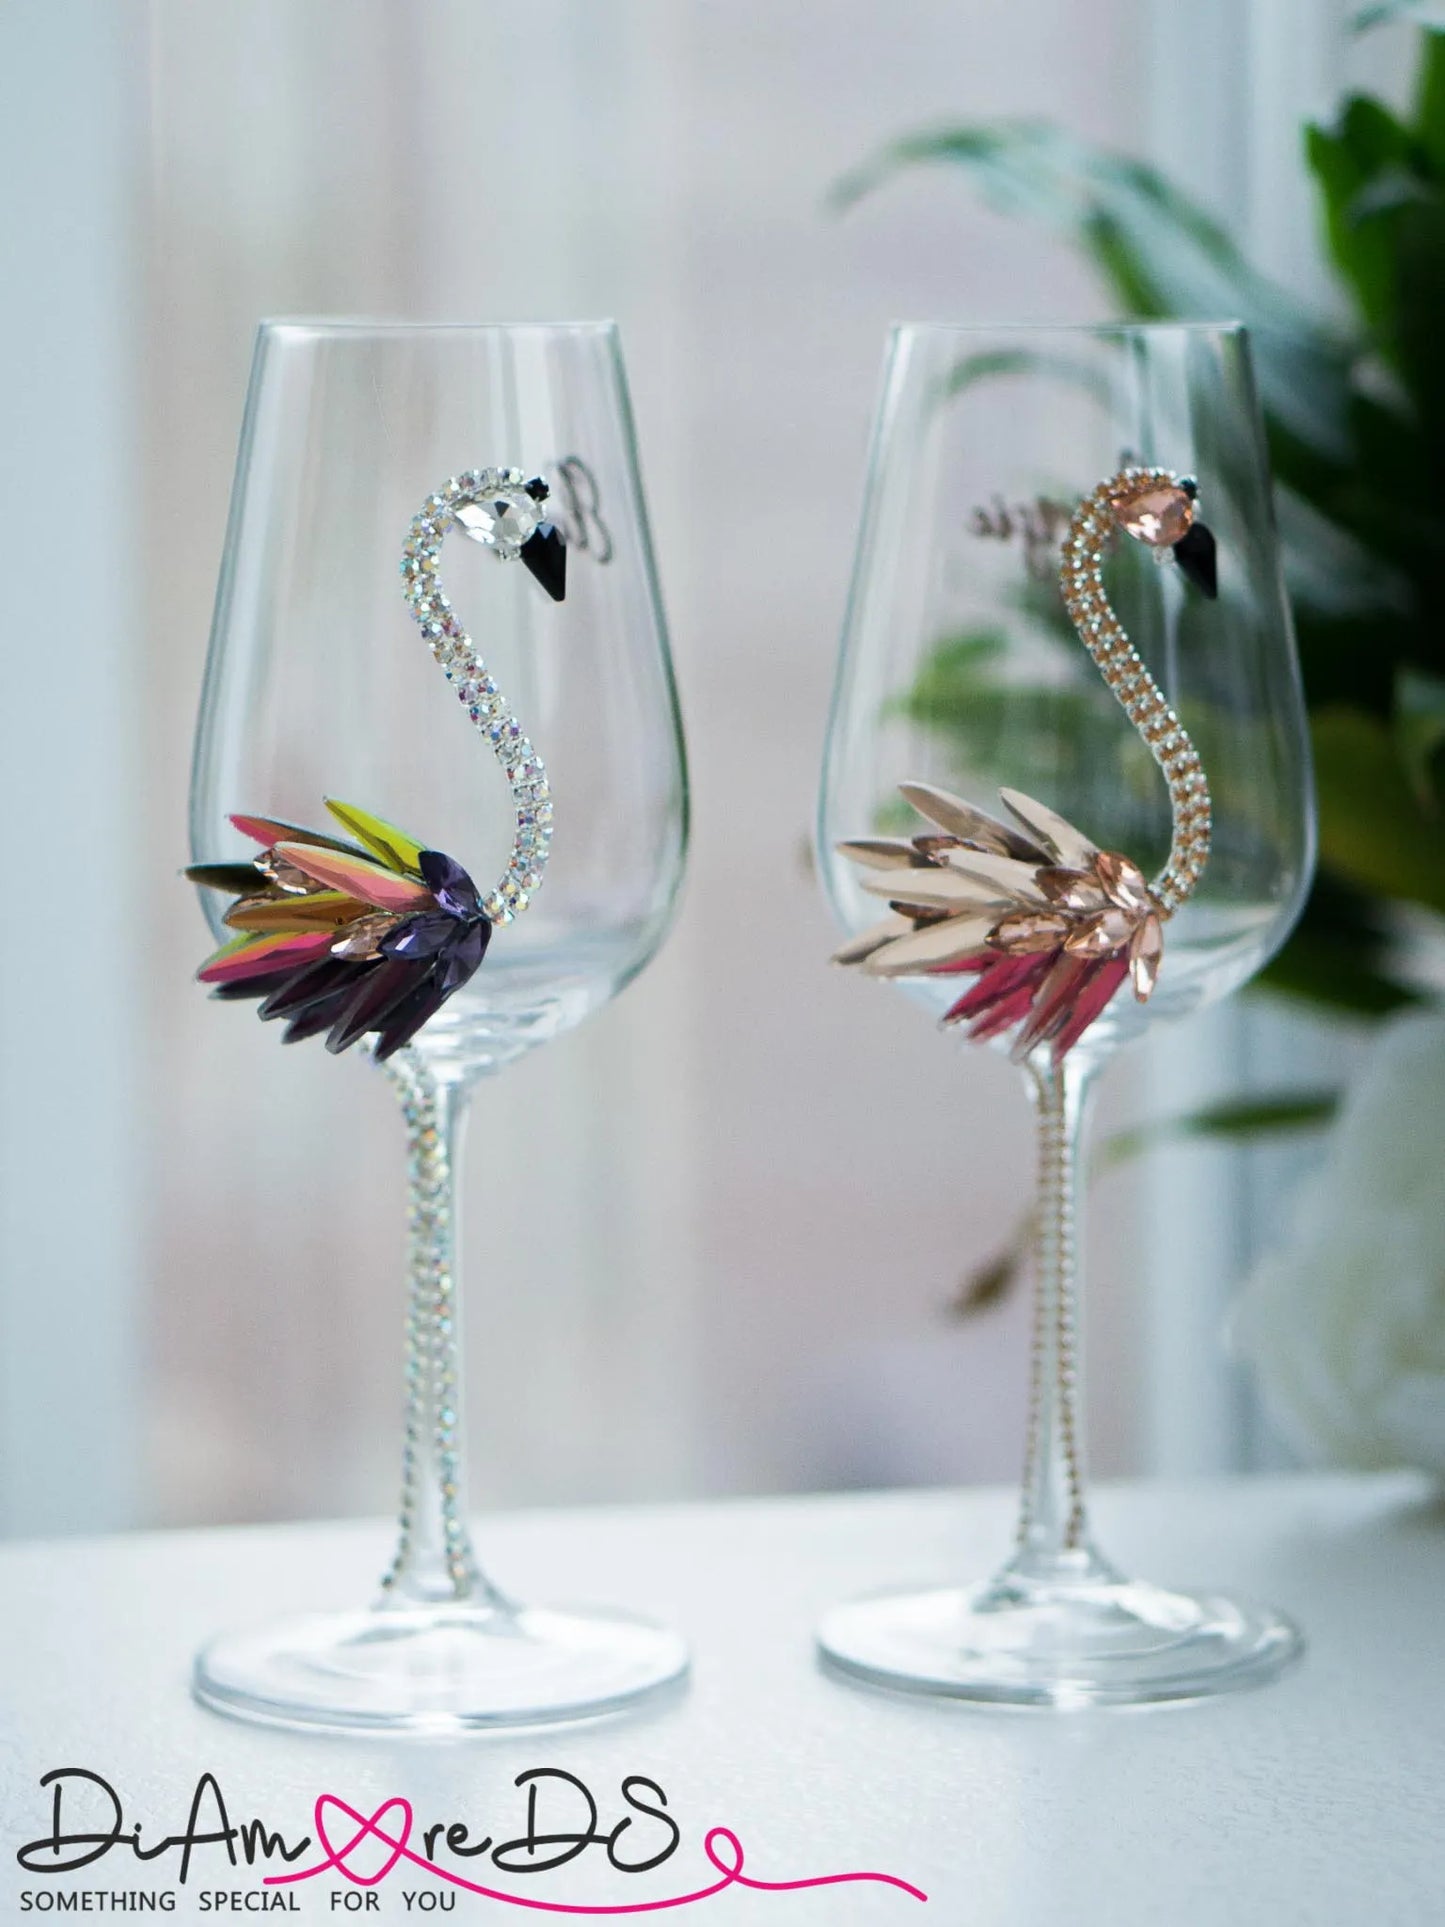 Exquisite handcrafted champagne flutes